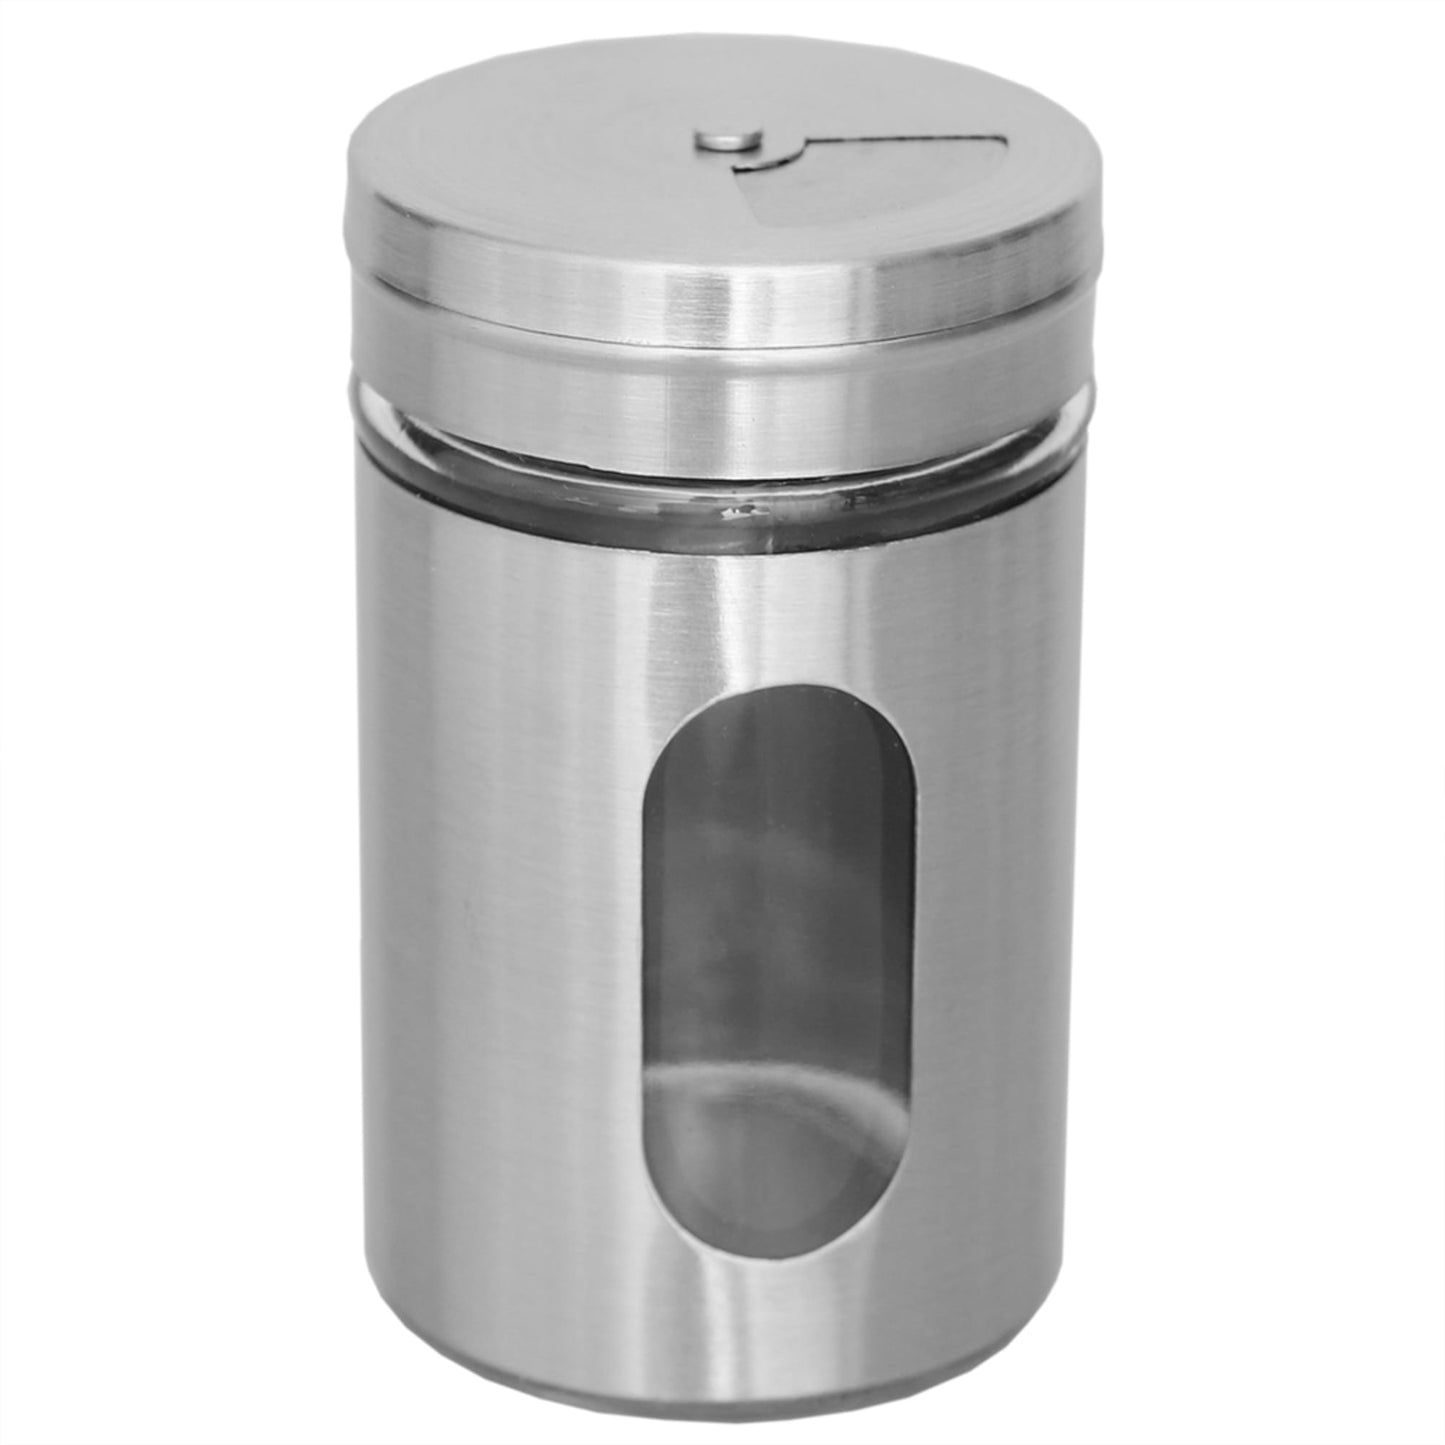 4 Oz. Stainless Steel Shaker with Glass Window, Silver